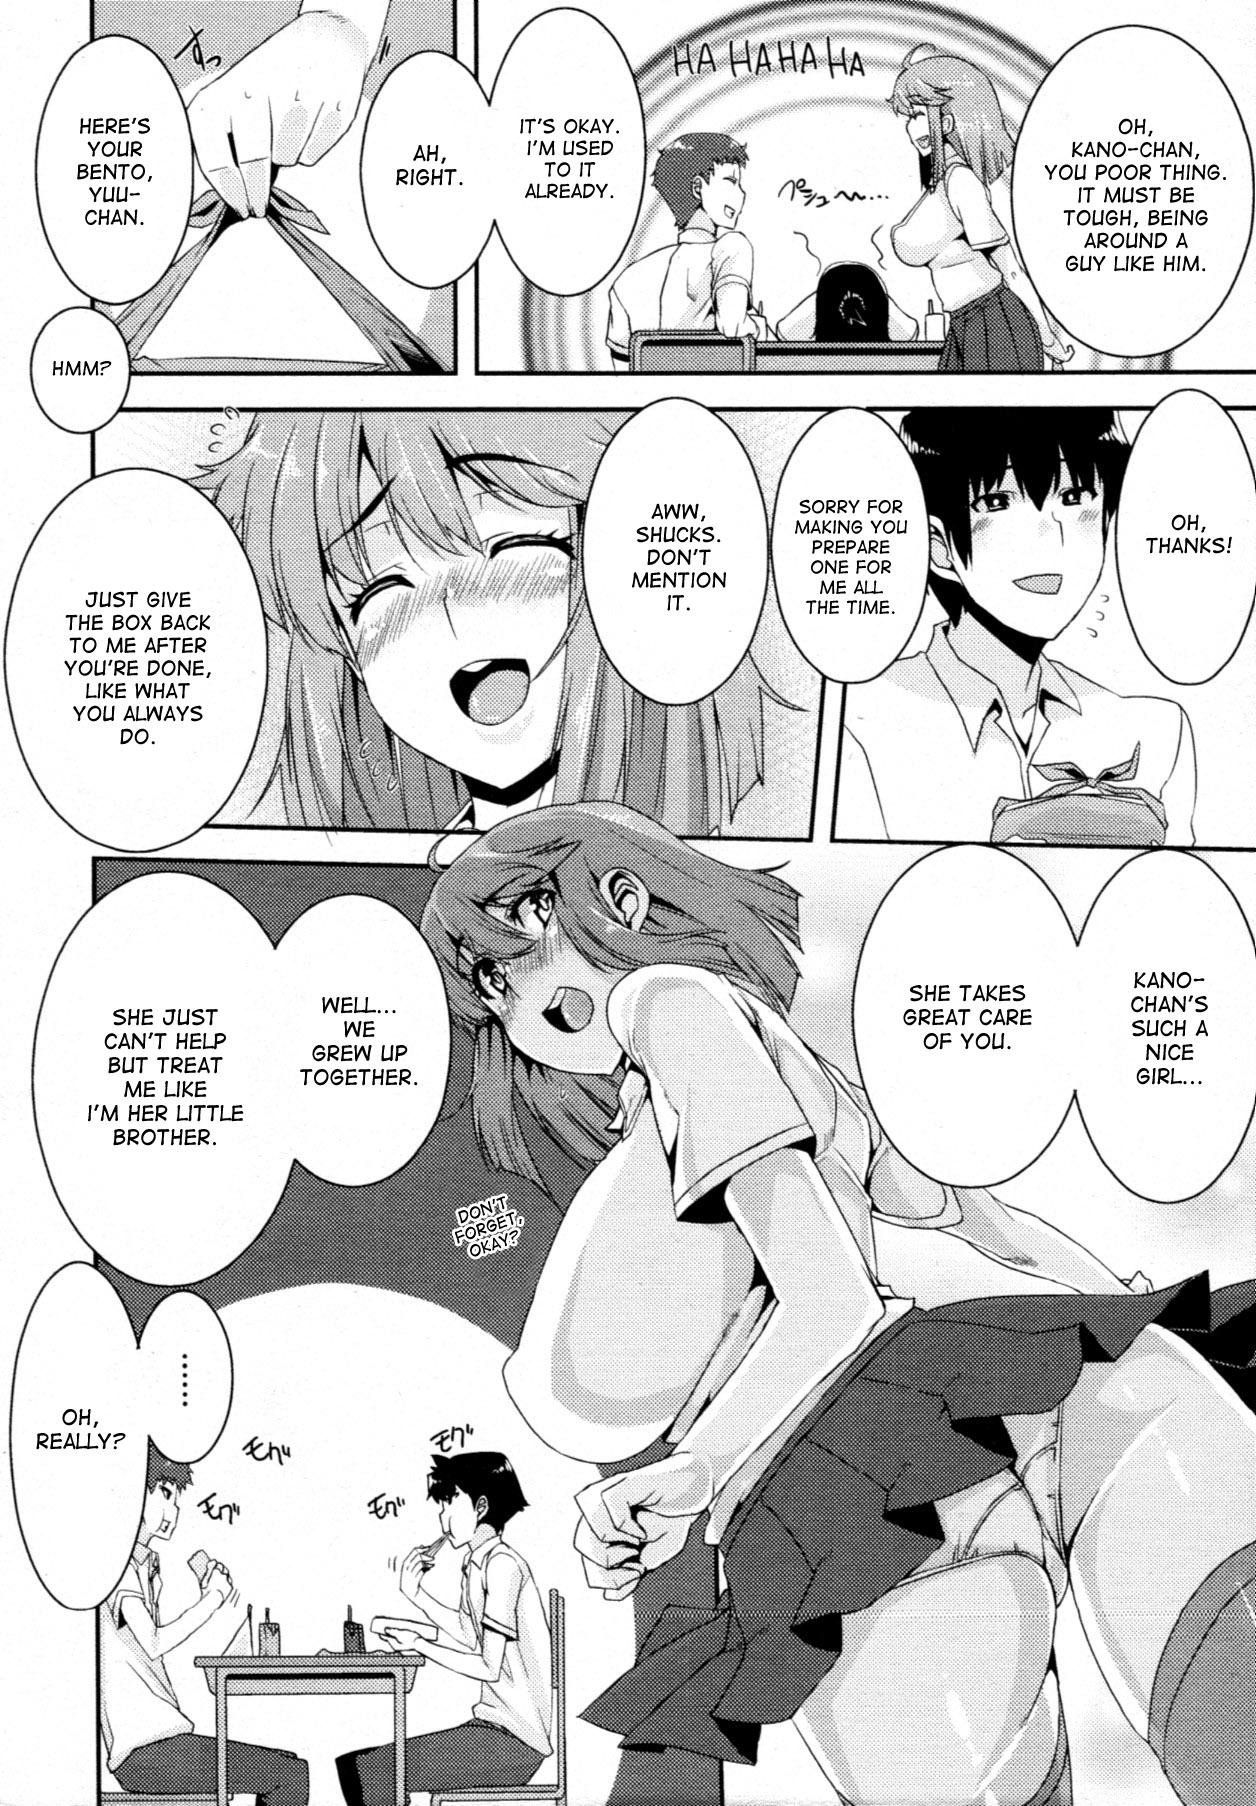 Style Chijo-sama no Jijou | The Perverted Lady's Circumstances Black - Page 4